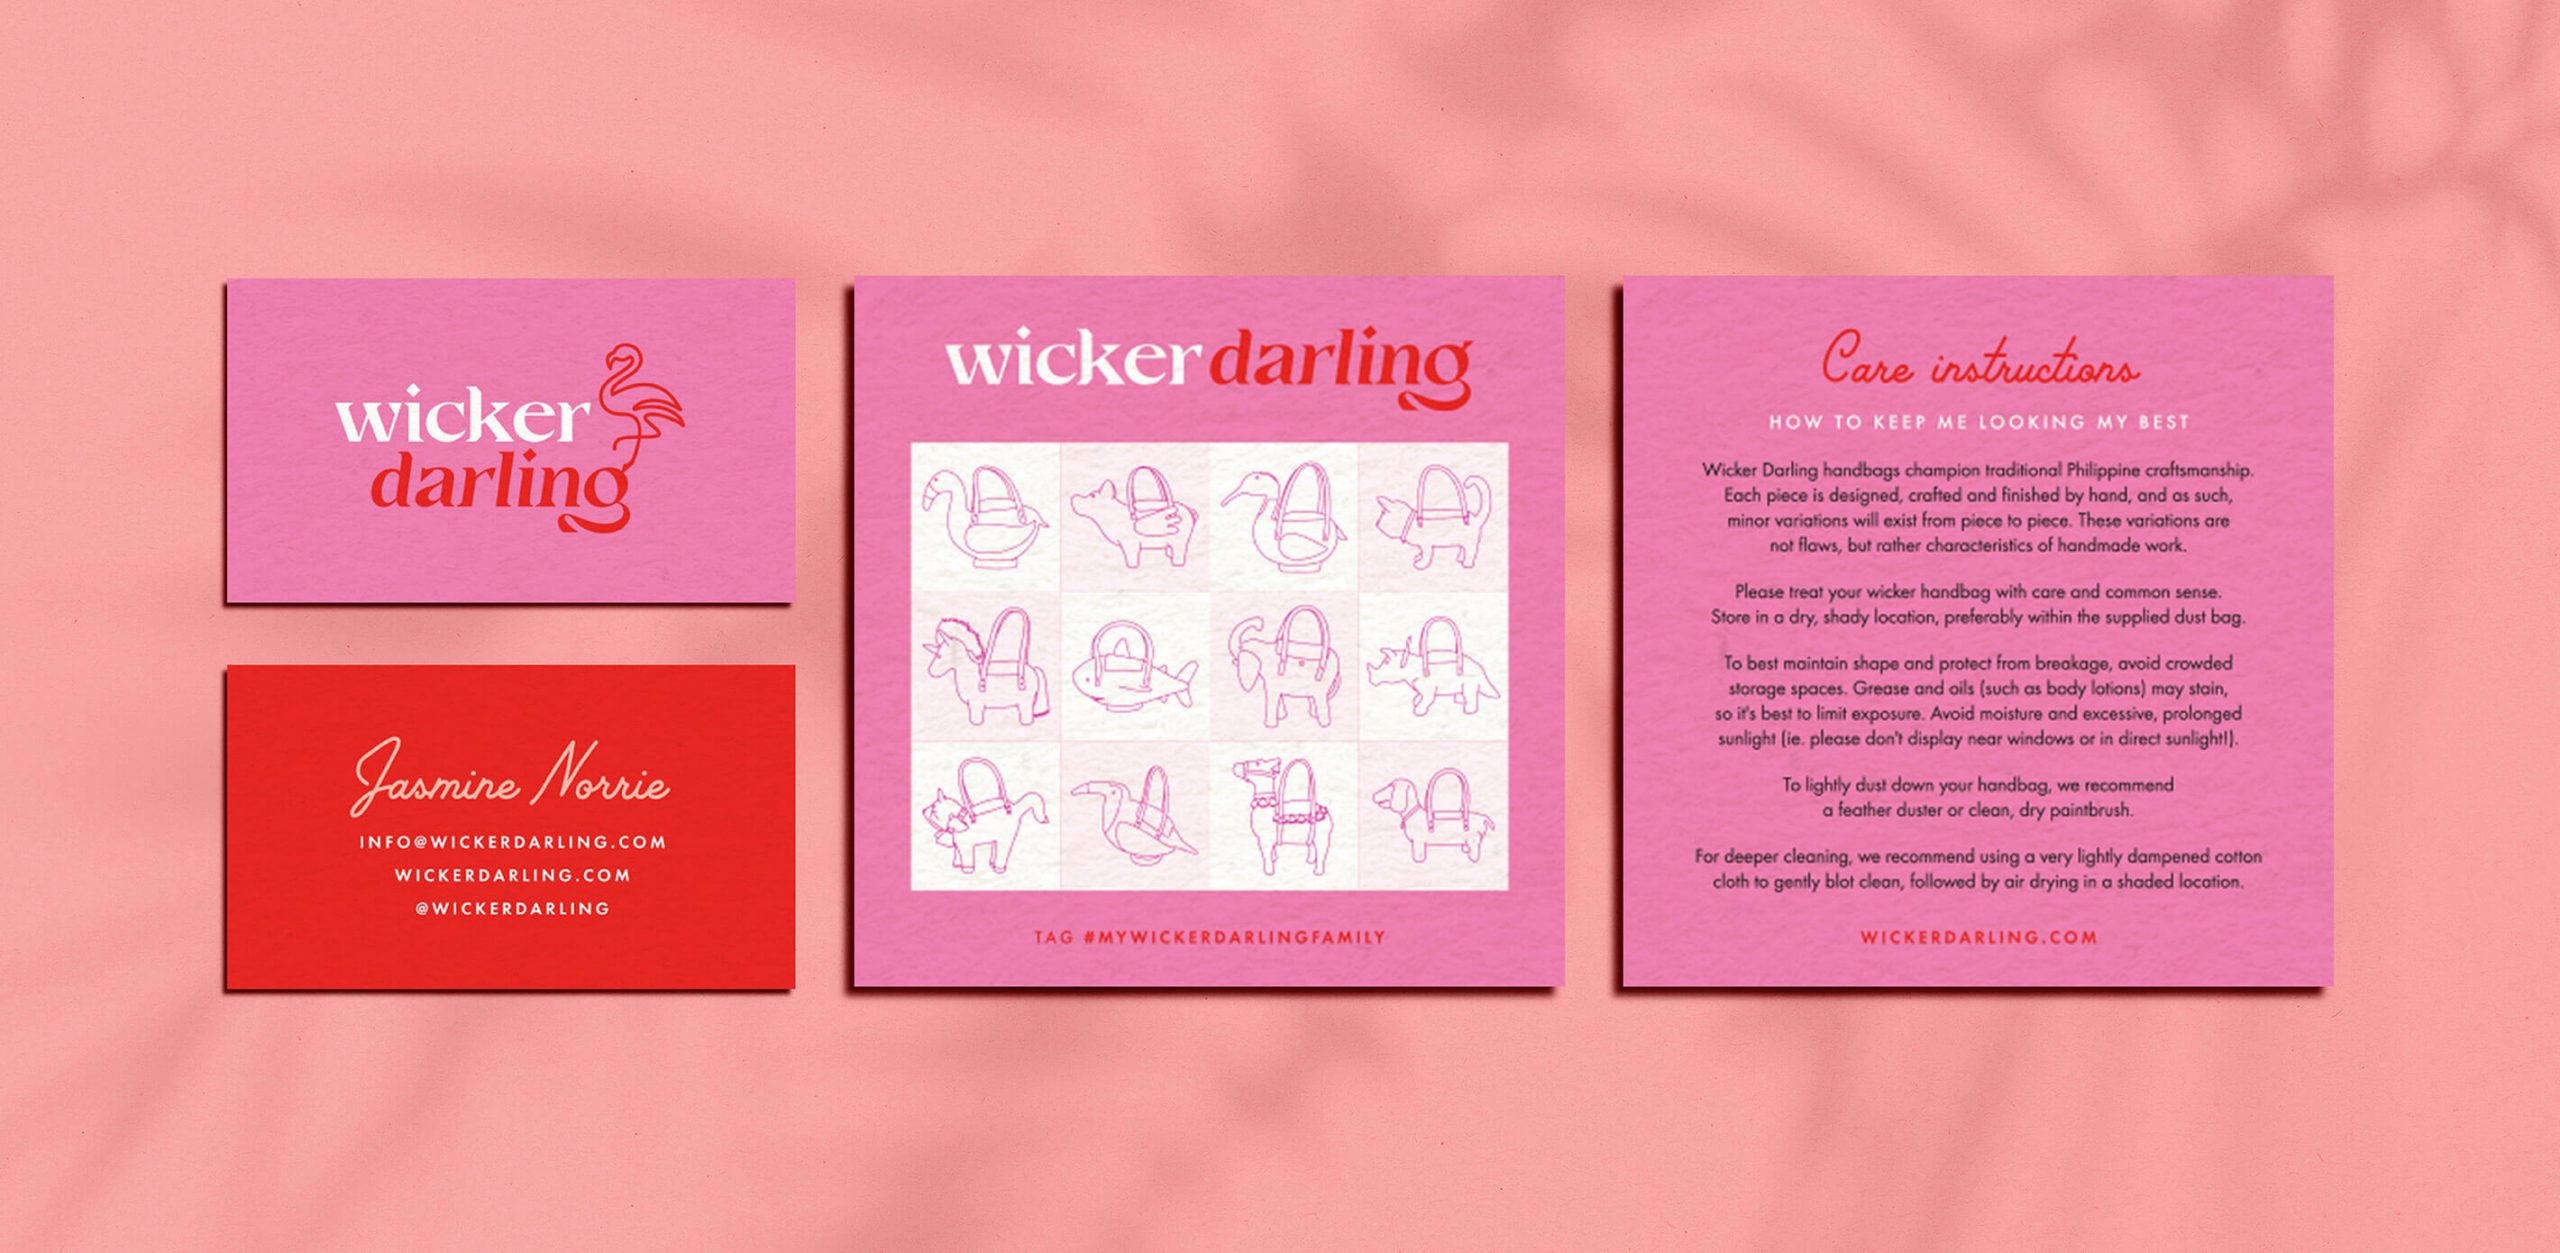 Wicker darling print collateral. There is a branded business card and a card with care instructions that has a side in teh style of a vintage bingo grid.